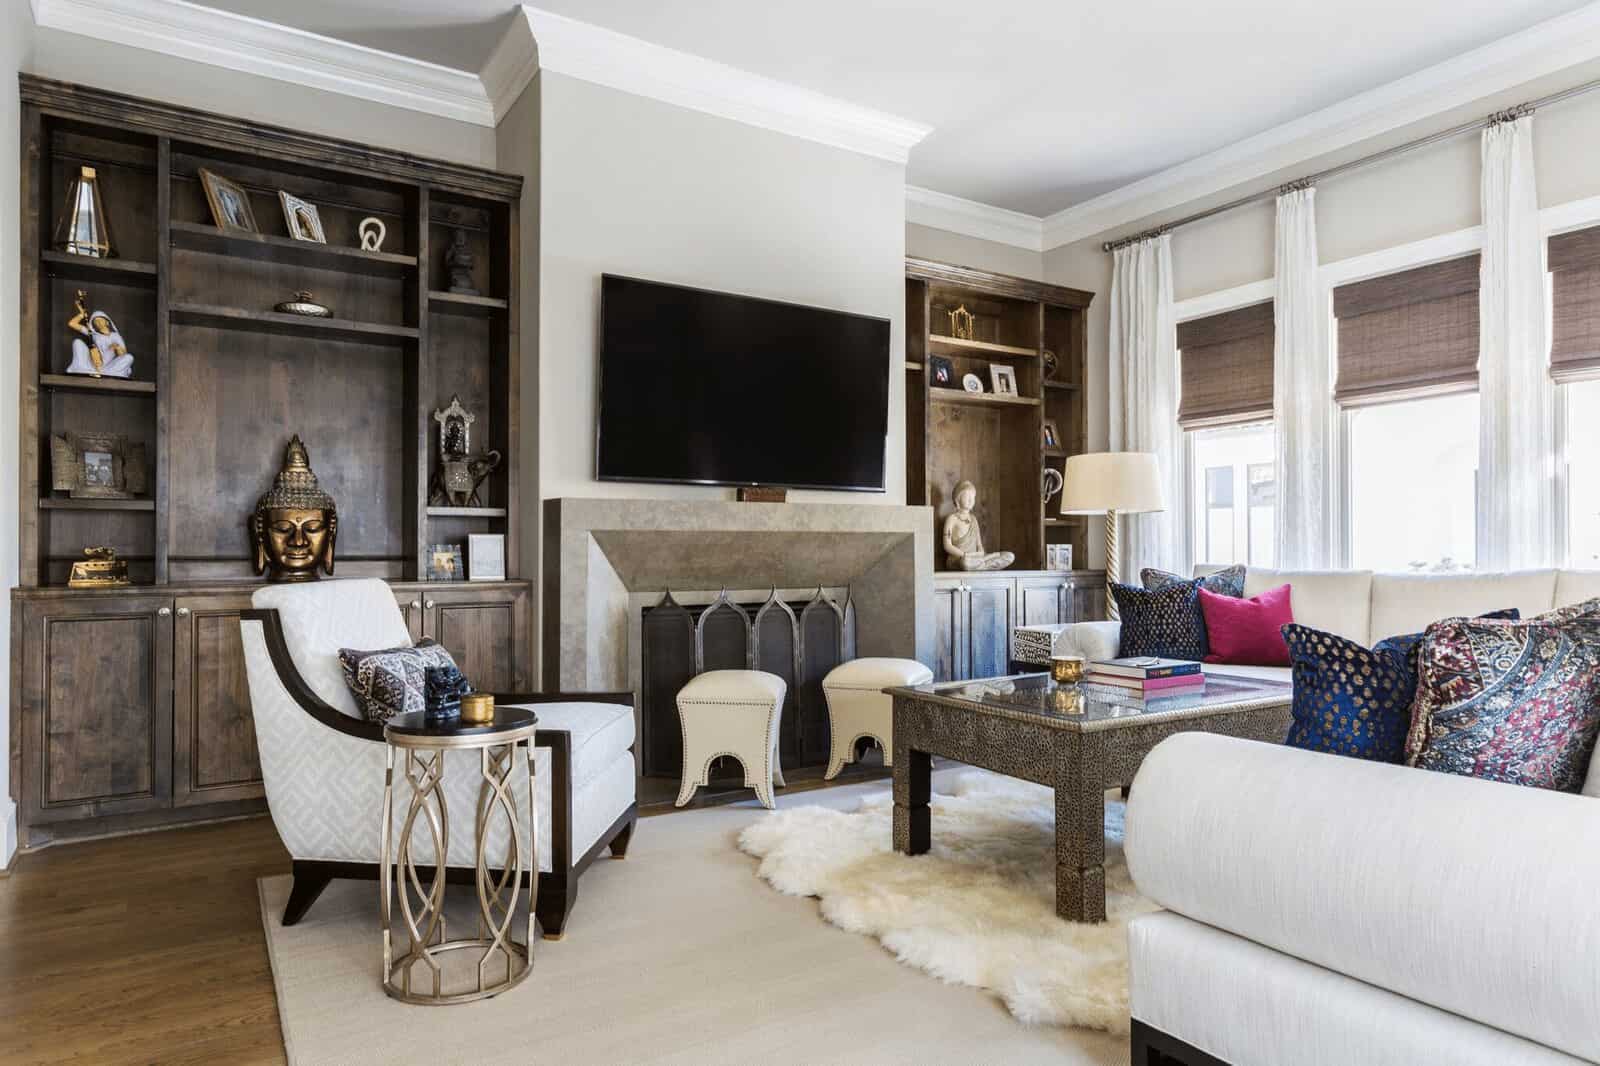 A living room inspired by the homeowner